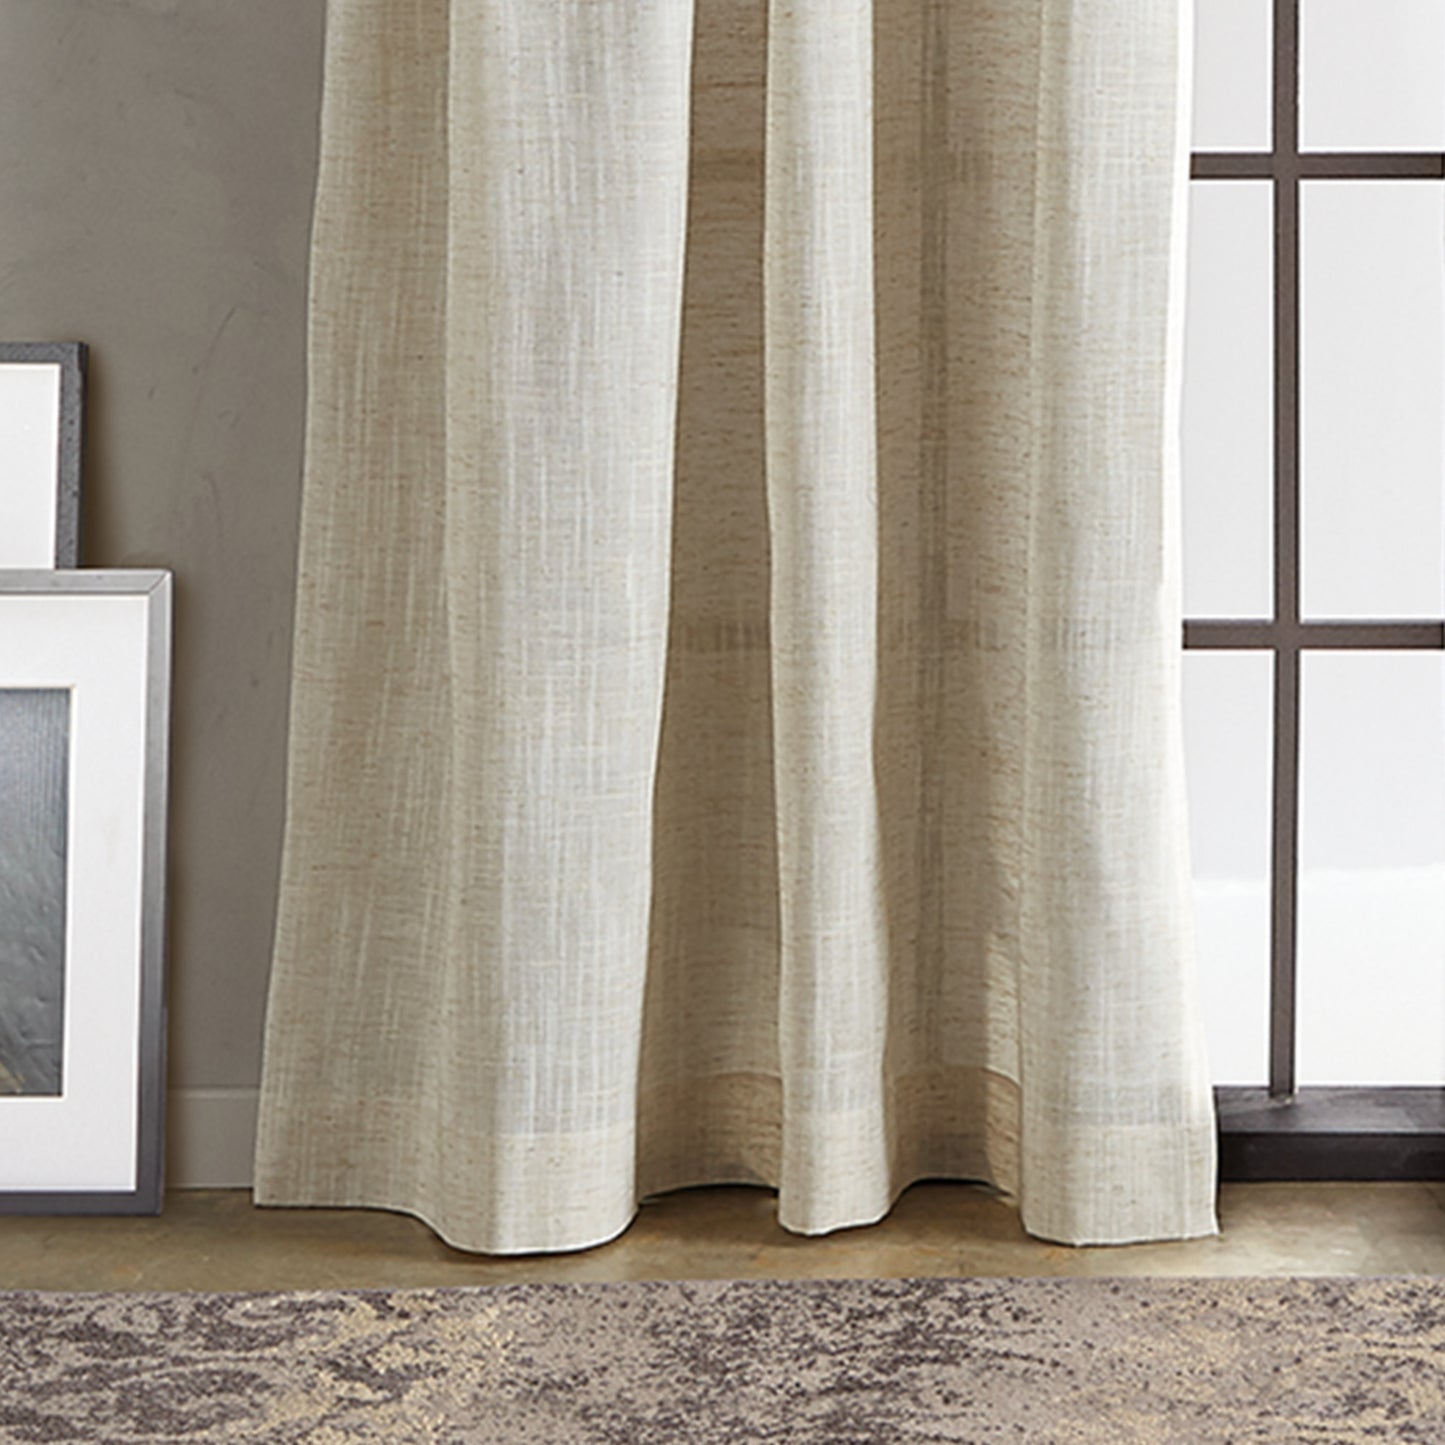 DKNY Classic Linen Inverted Pleat Curtain Panel Pair